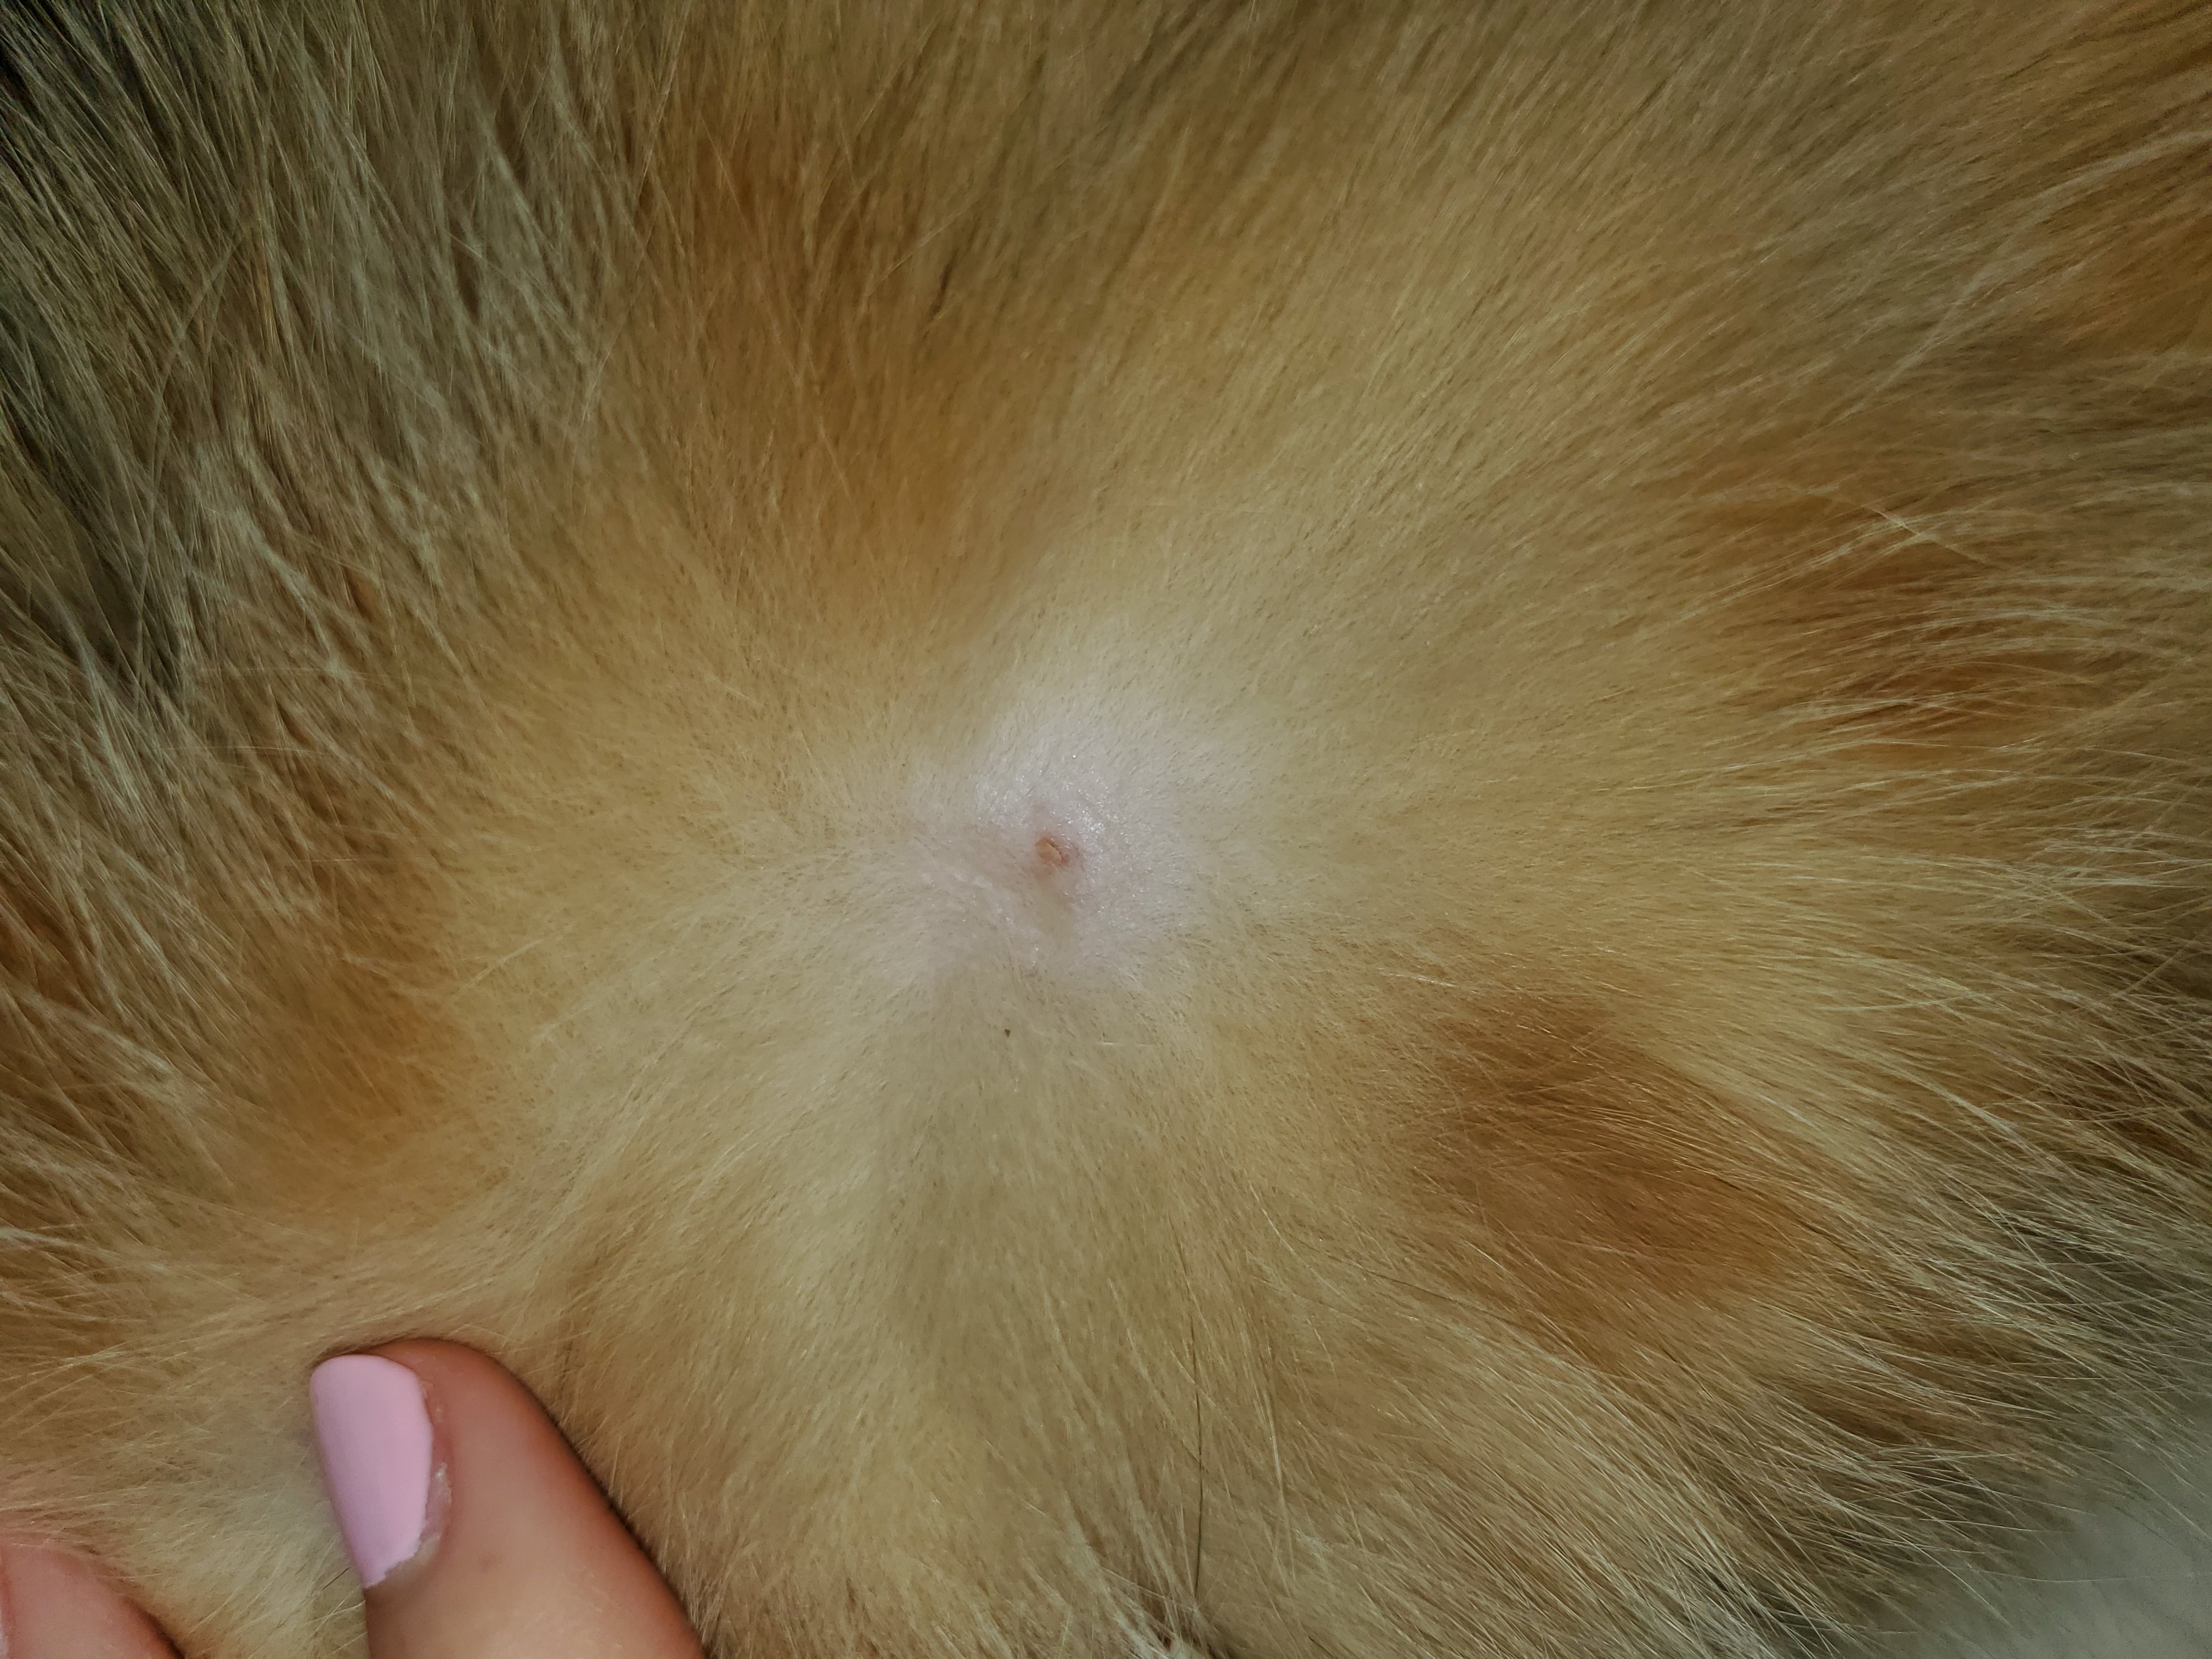 Big pimple/whitehead on belly TheCatSite